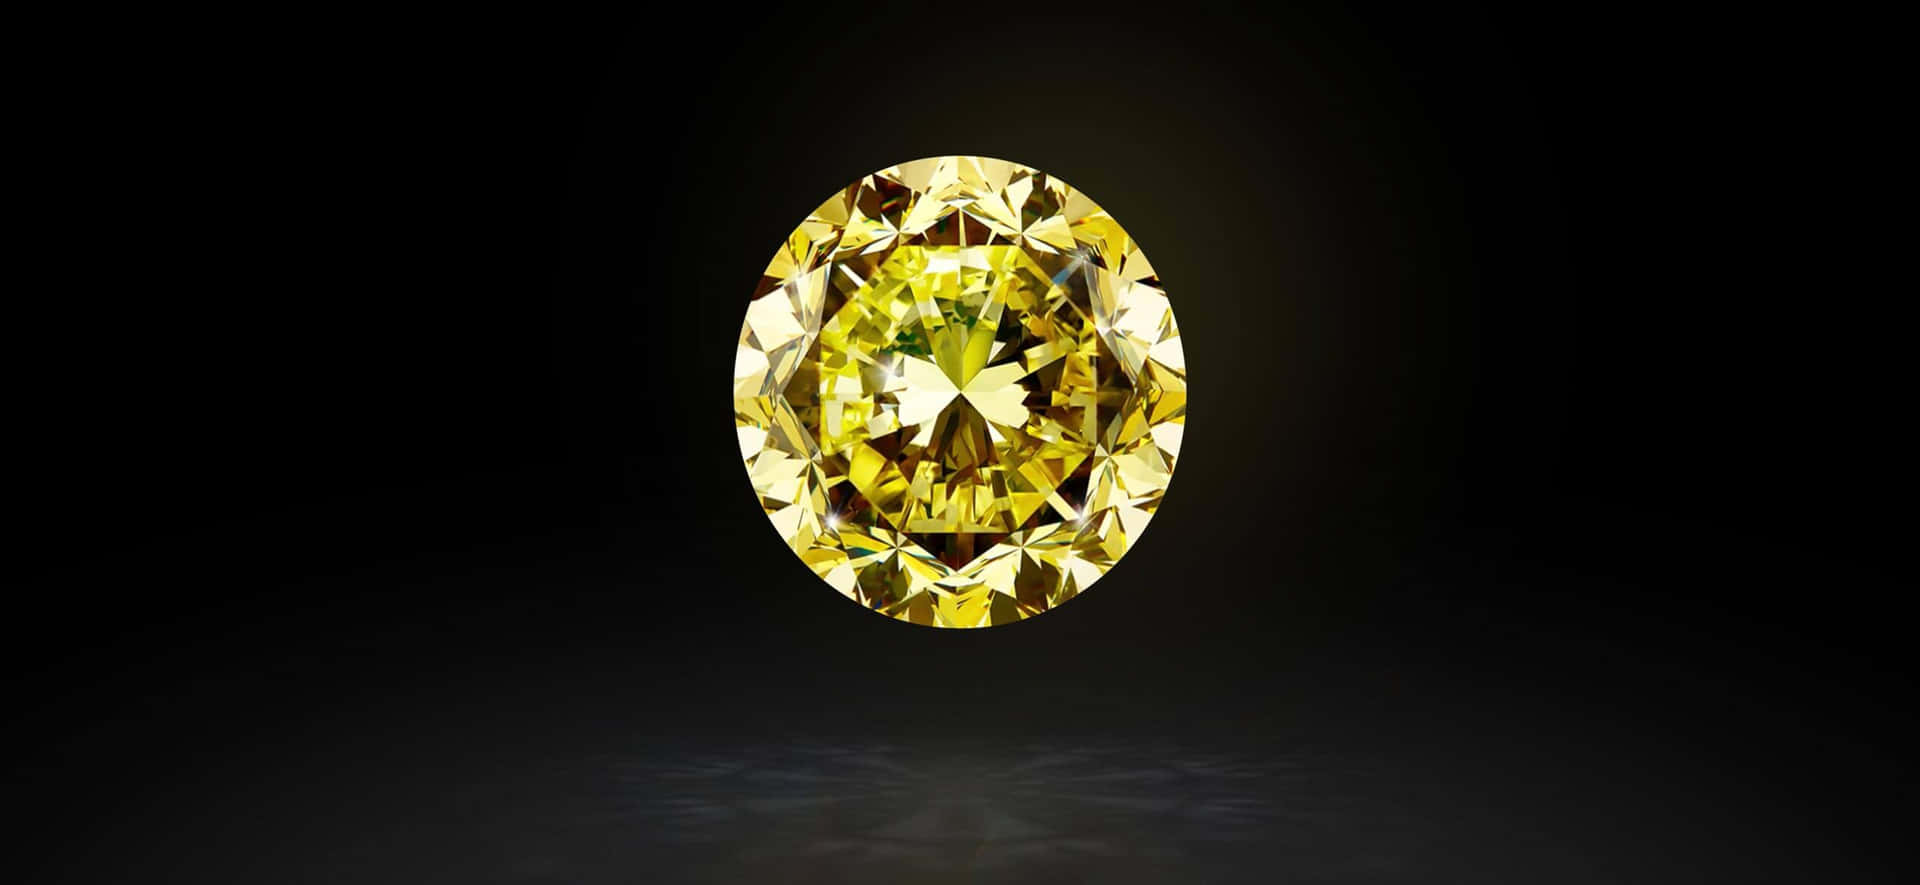 A Stunning Yellow Diamond Shining Brightly Against a Dark Background Wallpaper